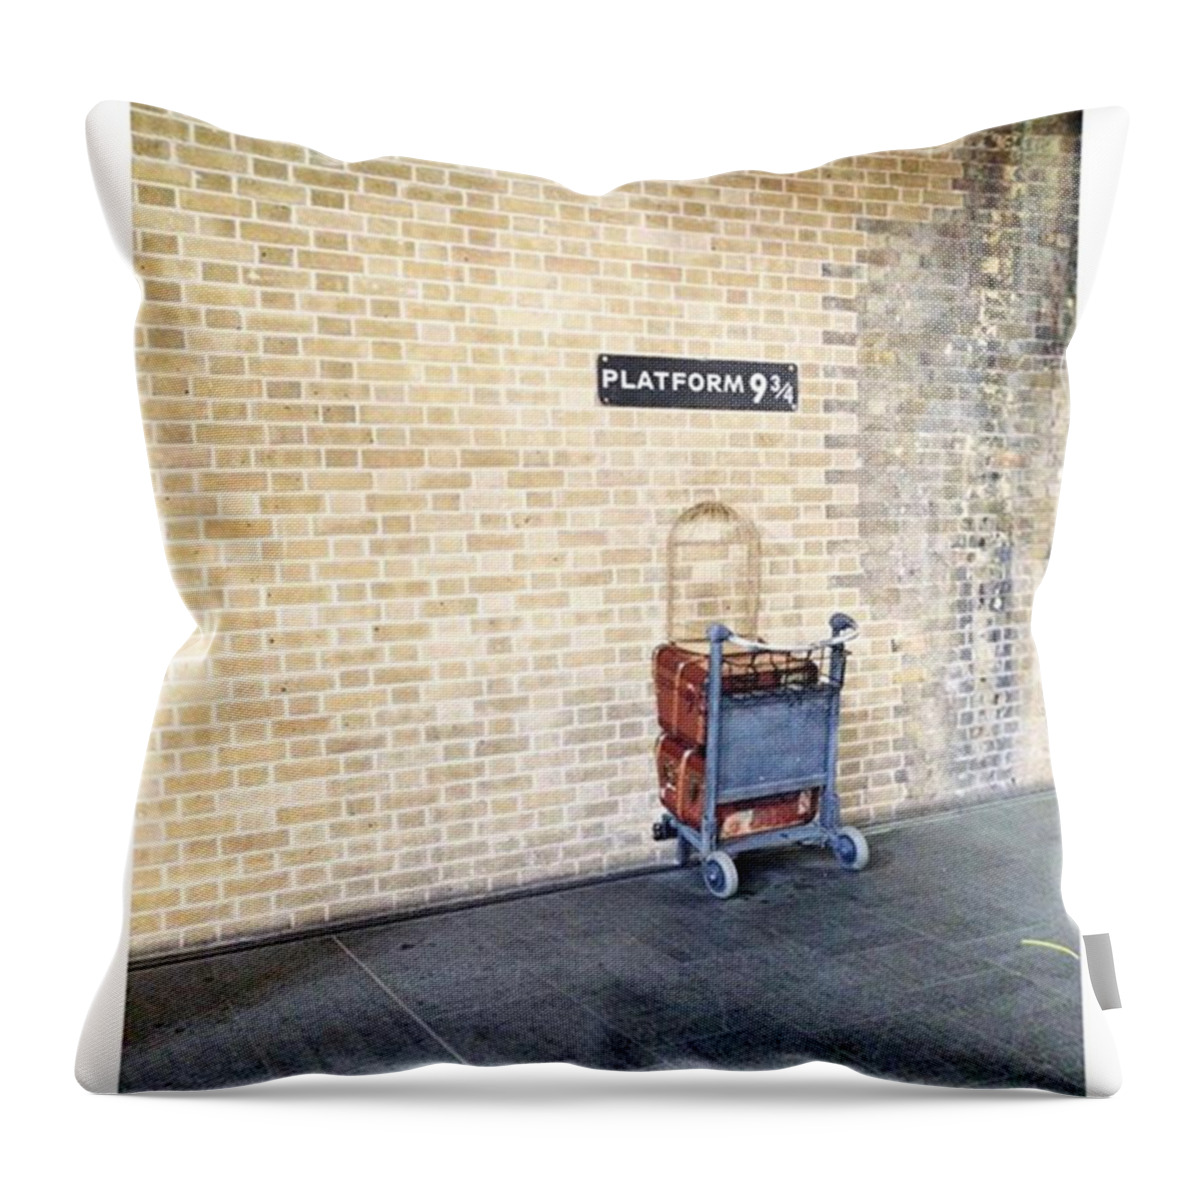 Kings Cross Station Throw Pillow featuring the photograph Harry Potter by Bethan Bell-langford